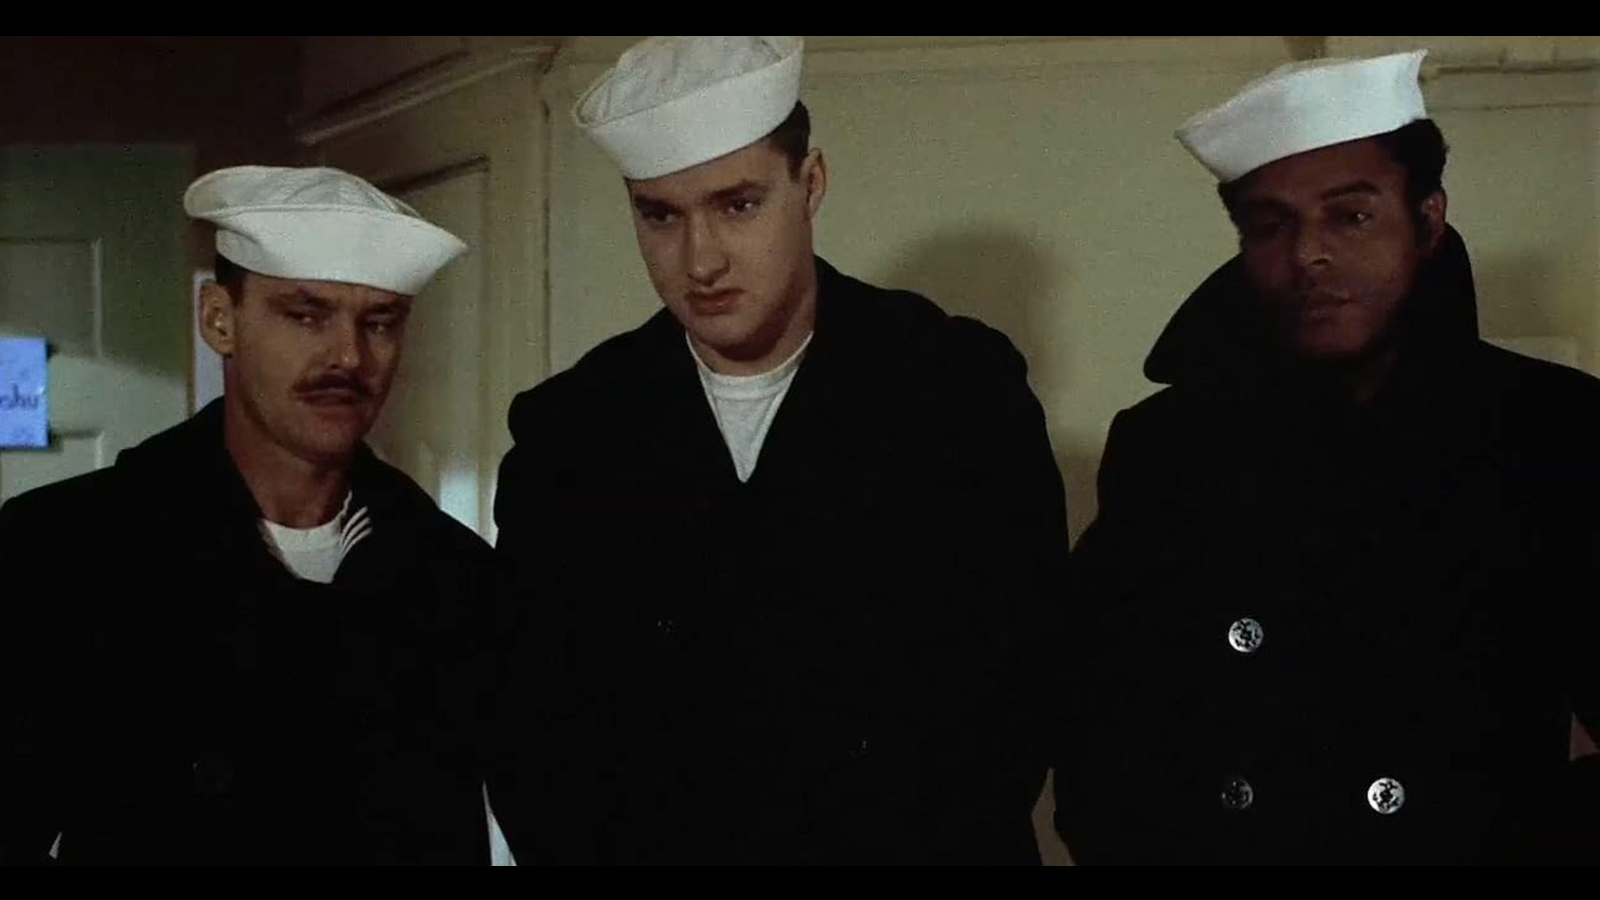 Hal Ashby’s The Last Detail: “Imprisoned” by the US Navy, two sailors escort a young seaman to the brig